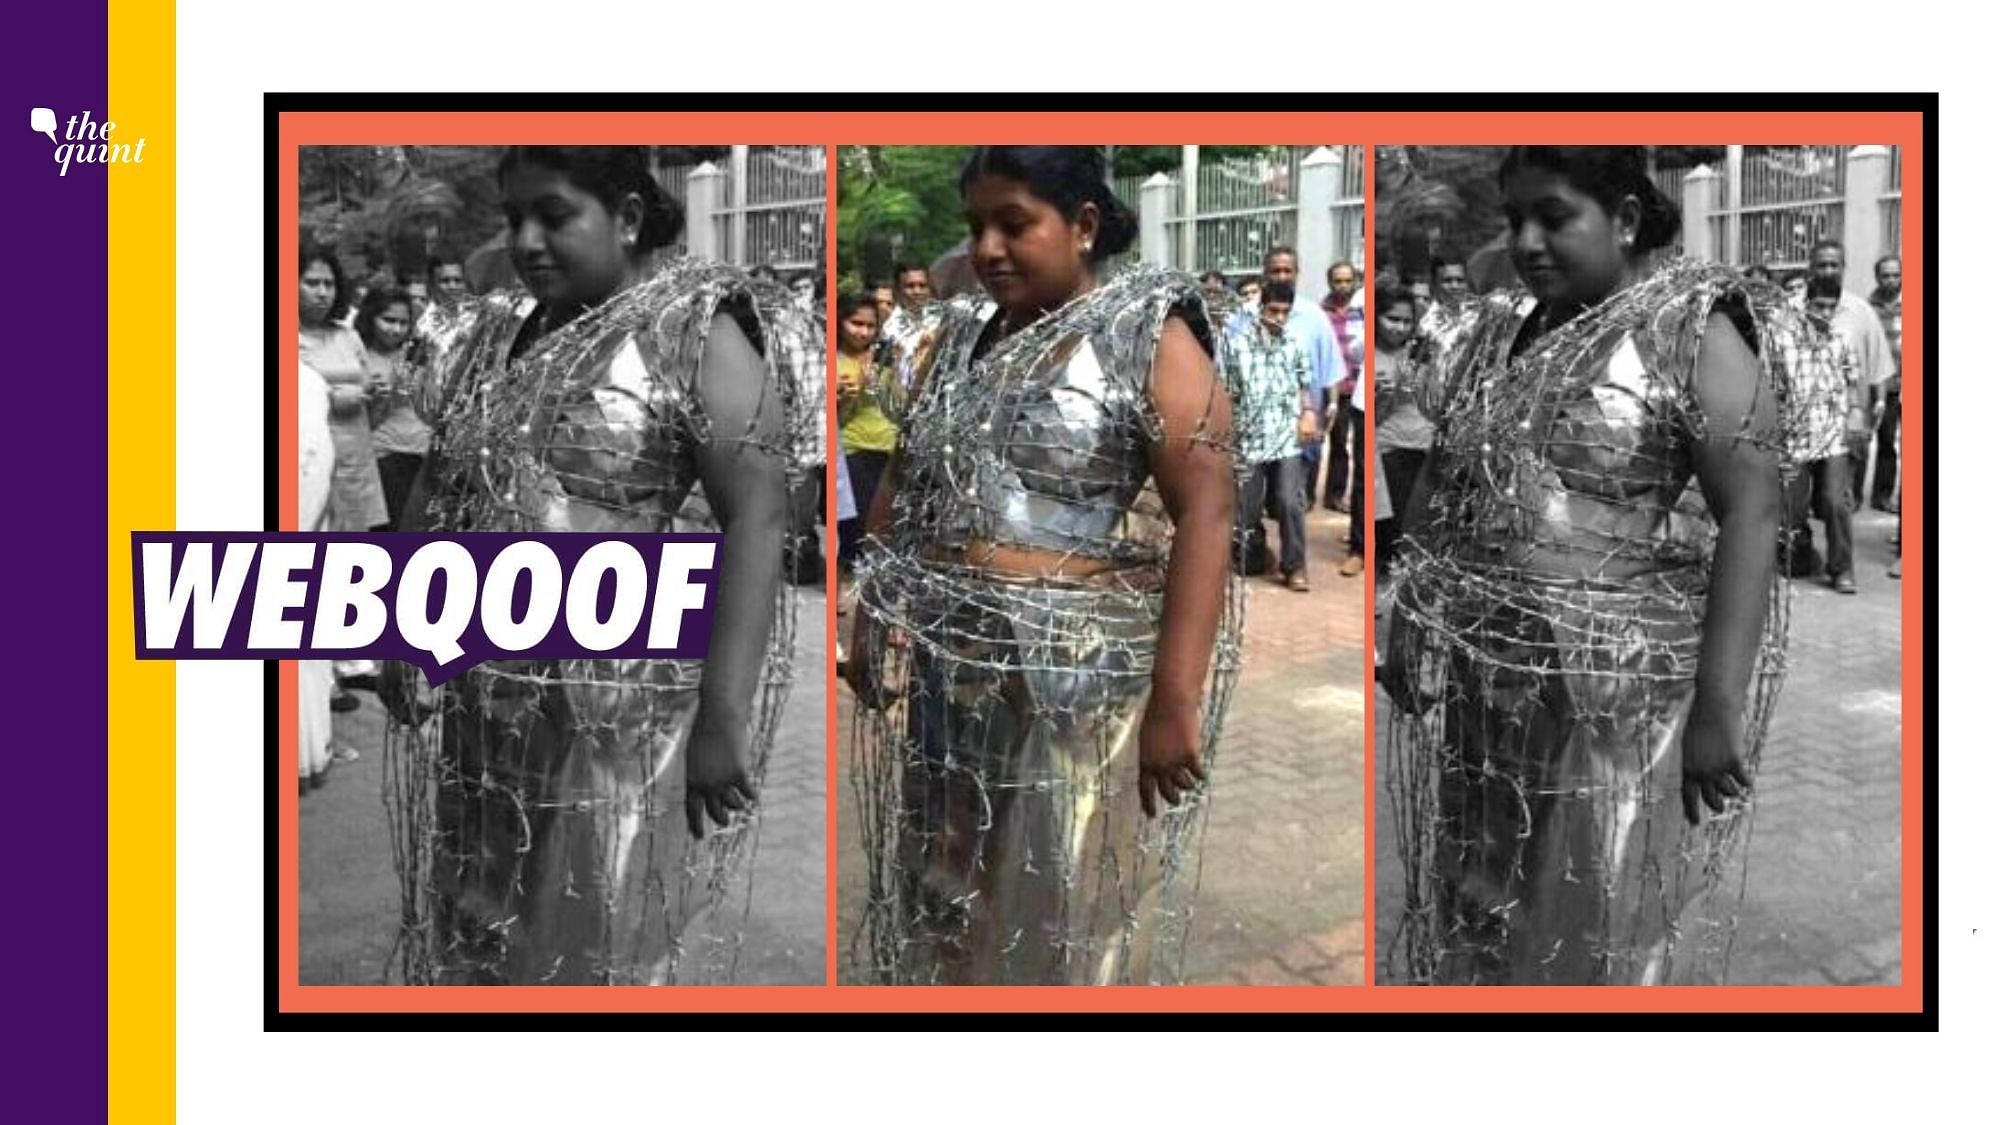 Image of a woman wearing a metal sheet as a sari with barbed wire wrapped around it is being widely shared with a claim that she is protesting over the Hathras Case.